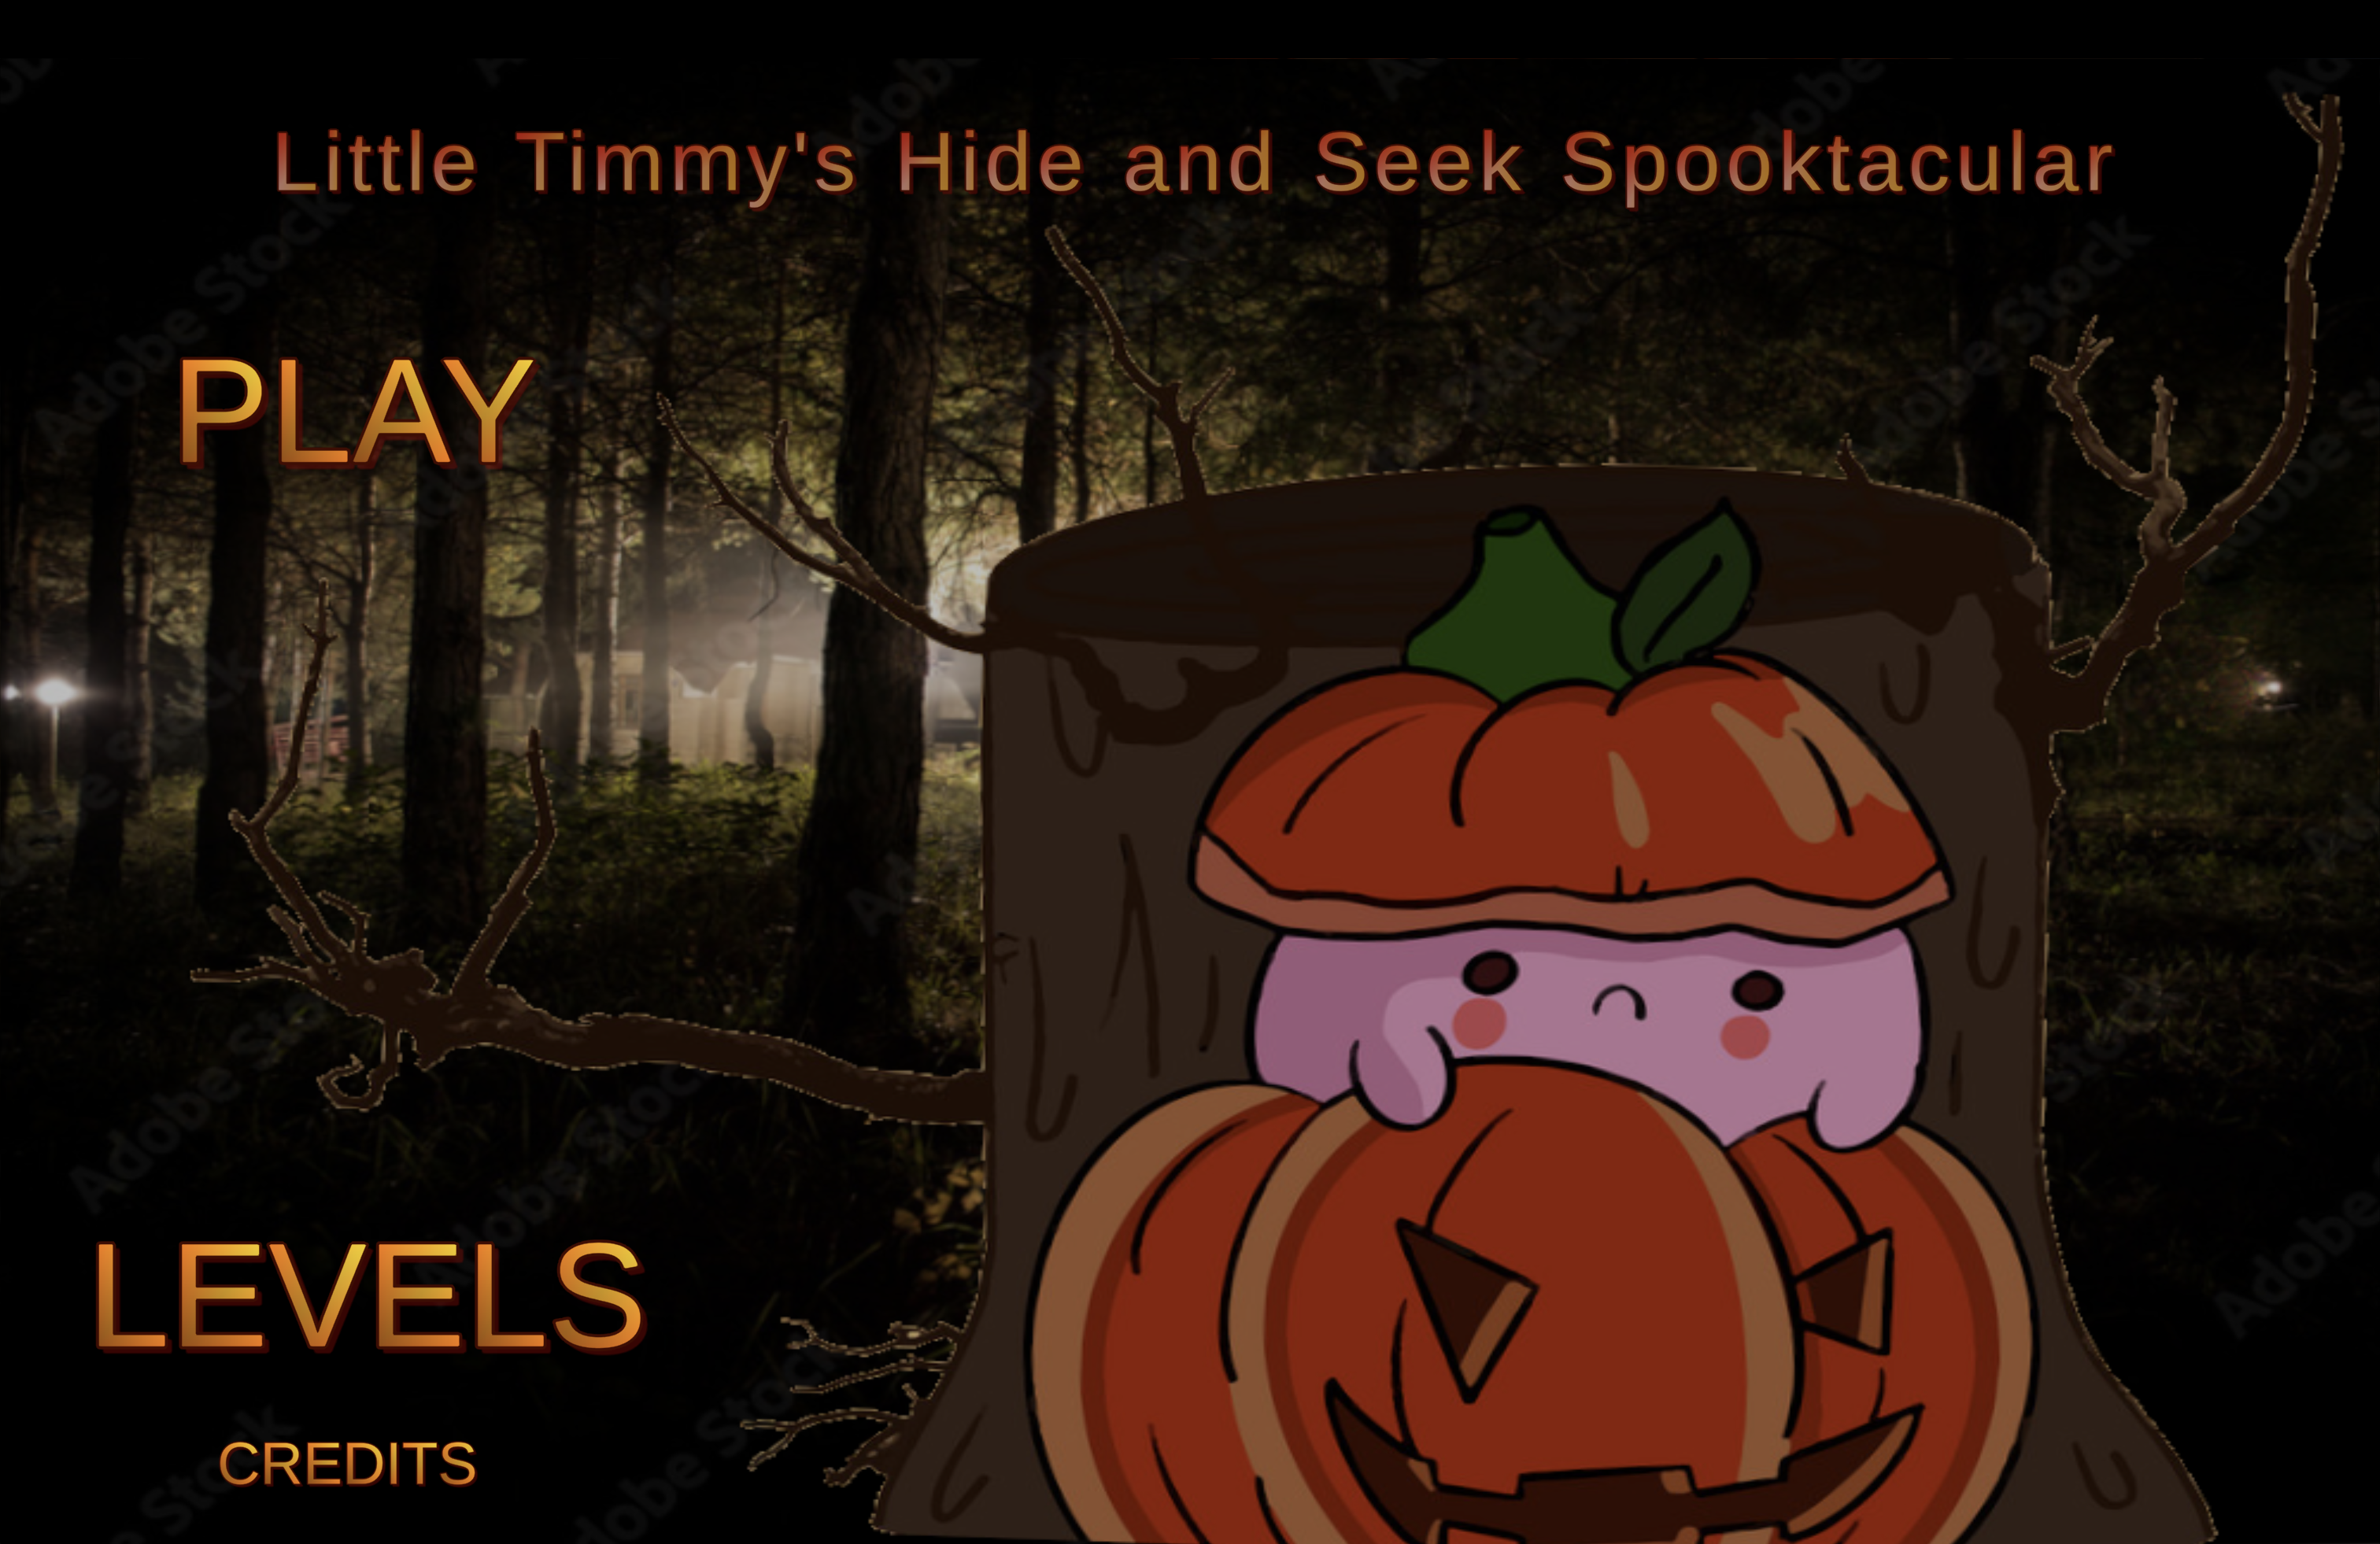 Little Timmy’s Hide and Seek Spooktacular